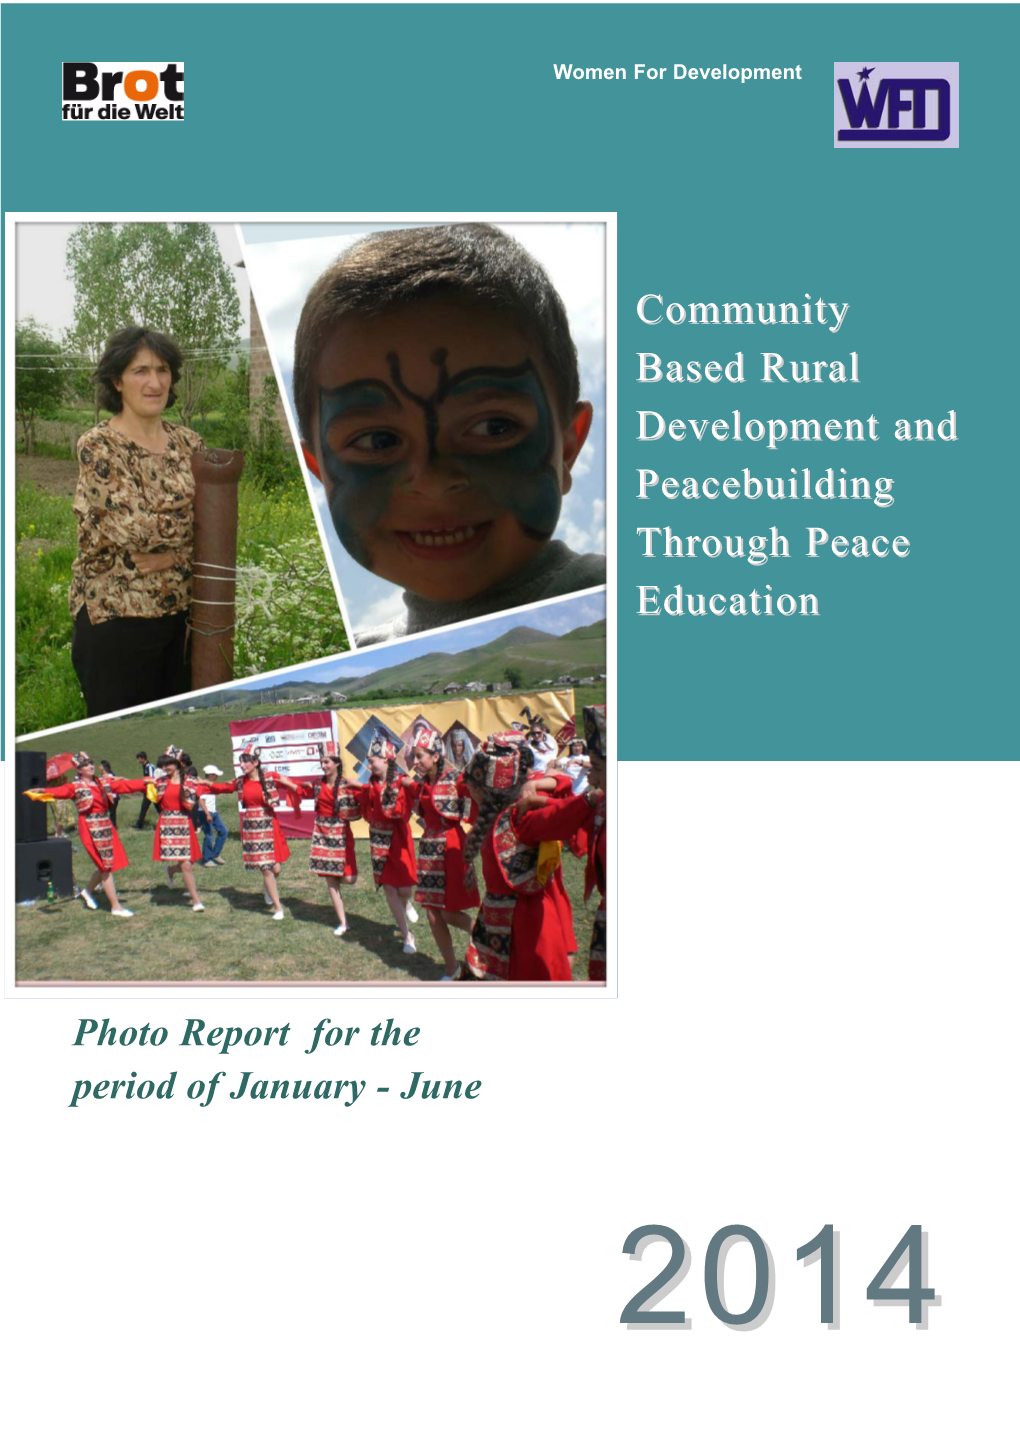 Community Based Rural Development and Peacebuilding Through Peace Education” Took Place